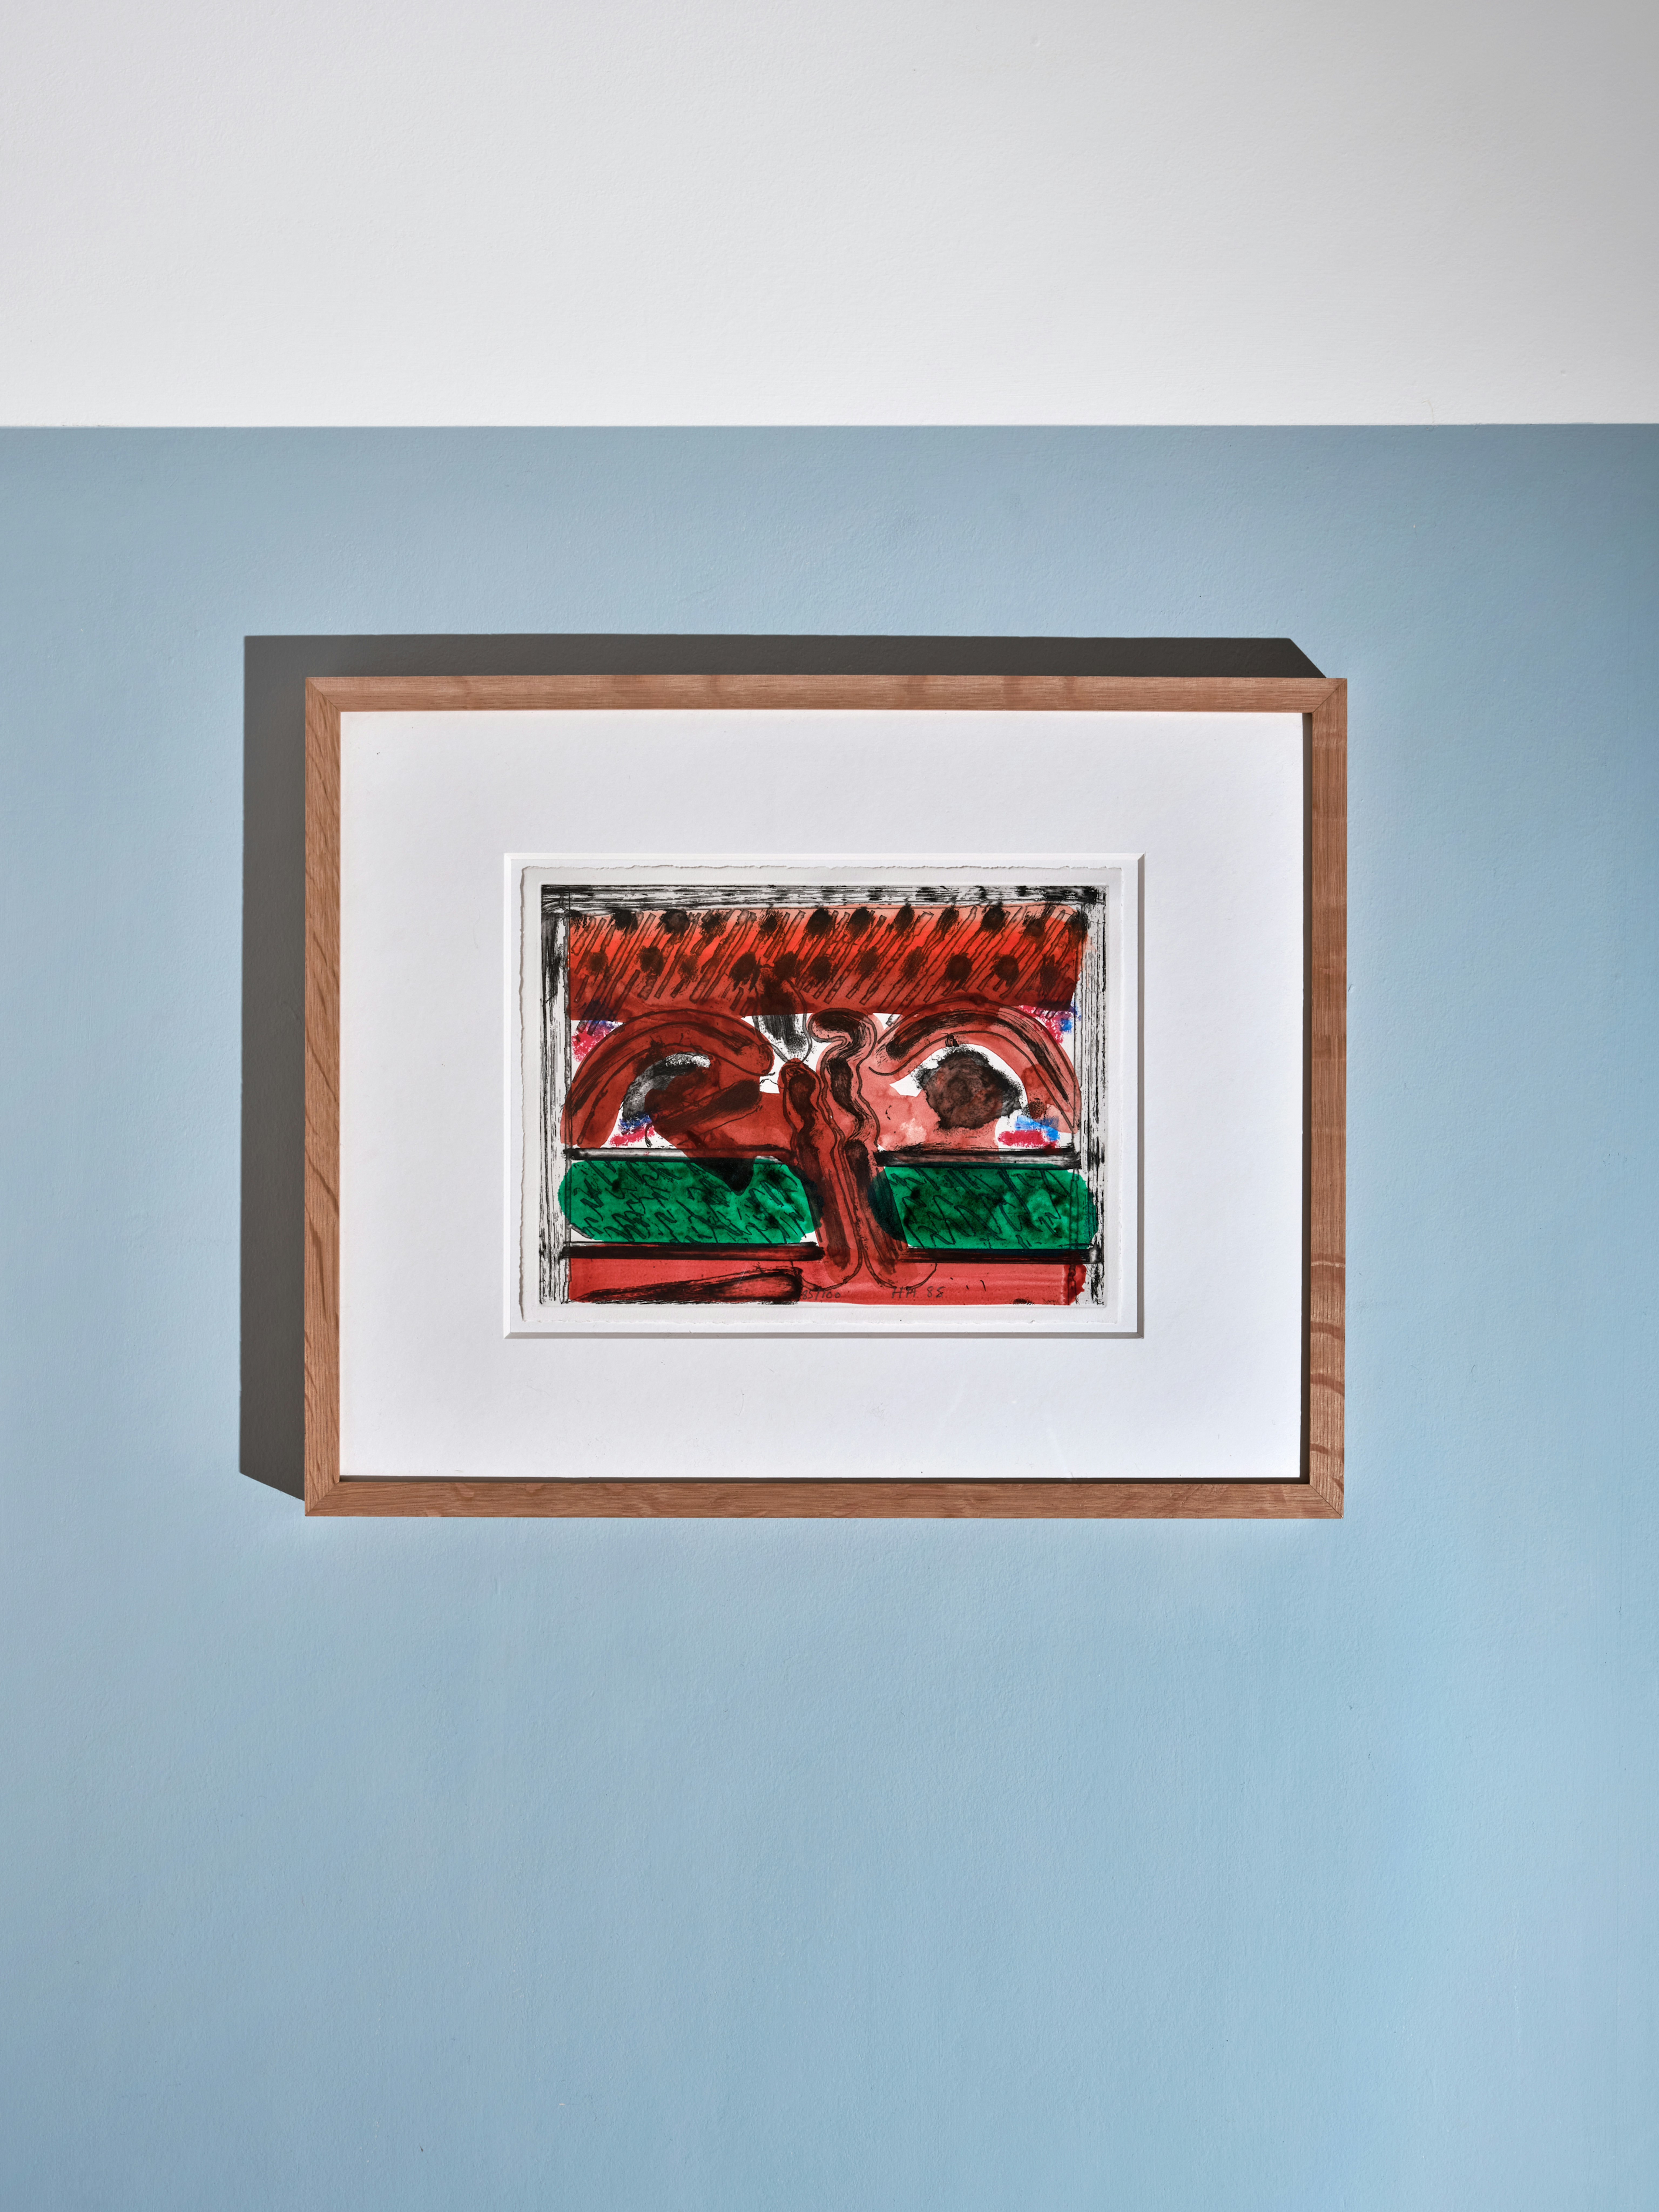 installation photogrqaph of soft-ground etching printed with hand colouring by Howard Hodgkin depicting abstract impression of David Hockney in Hollywood in handmade oak frame in situ